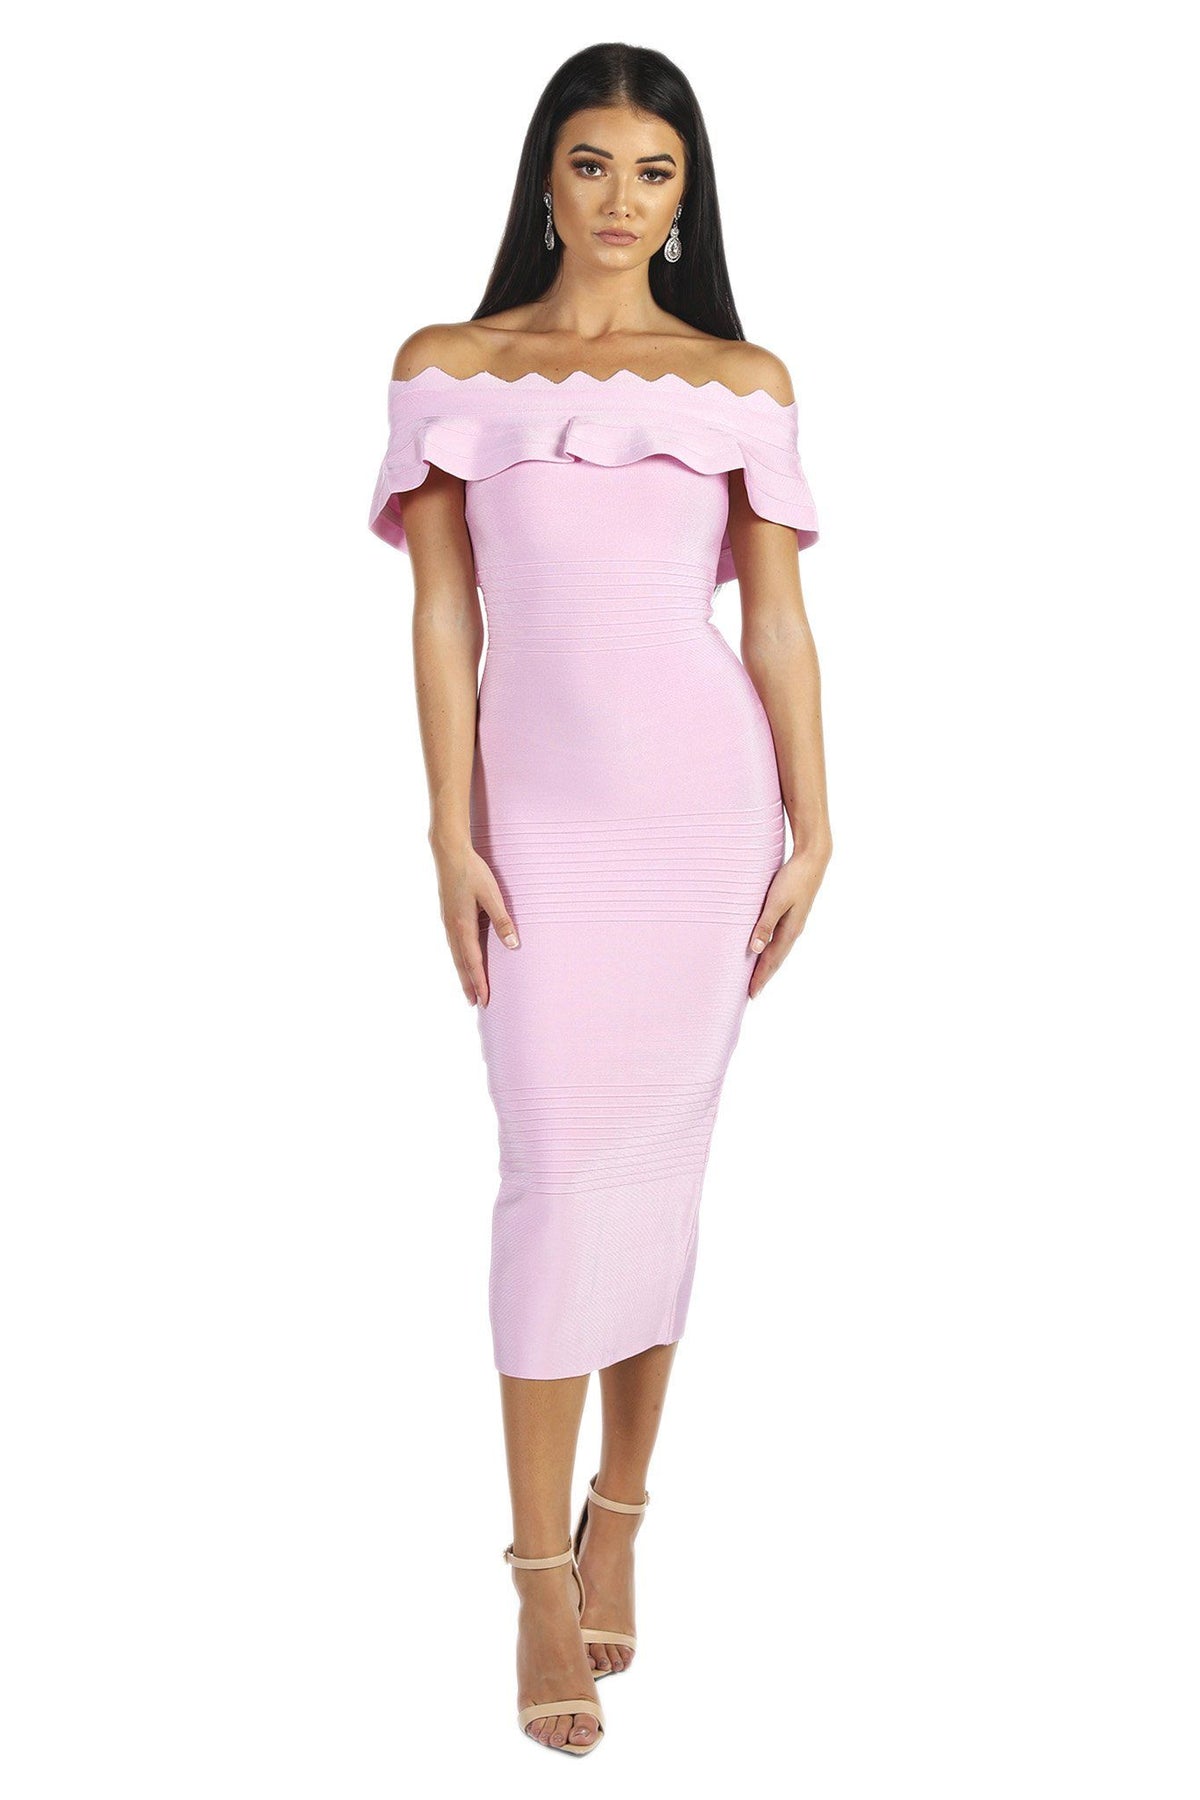 Light Pink Below Knee Length Bodycon Bandage Dress with Ruffled Off-The-Shoulder Neckline